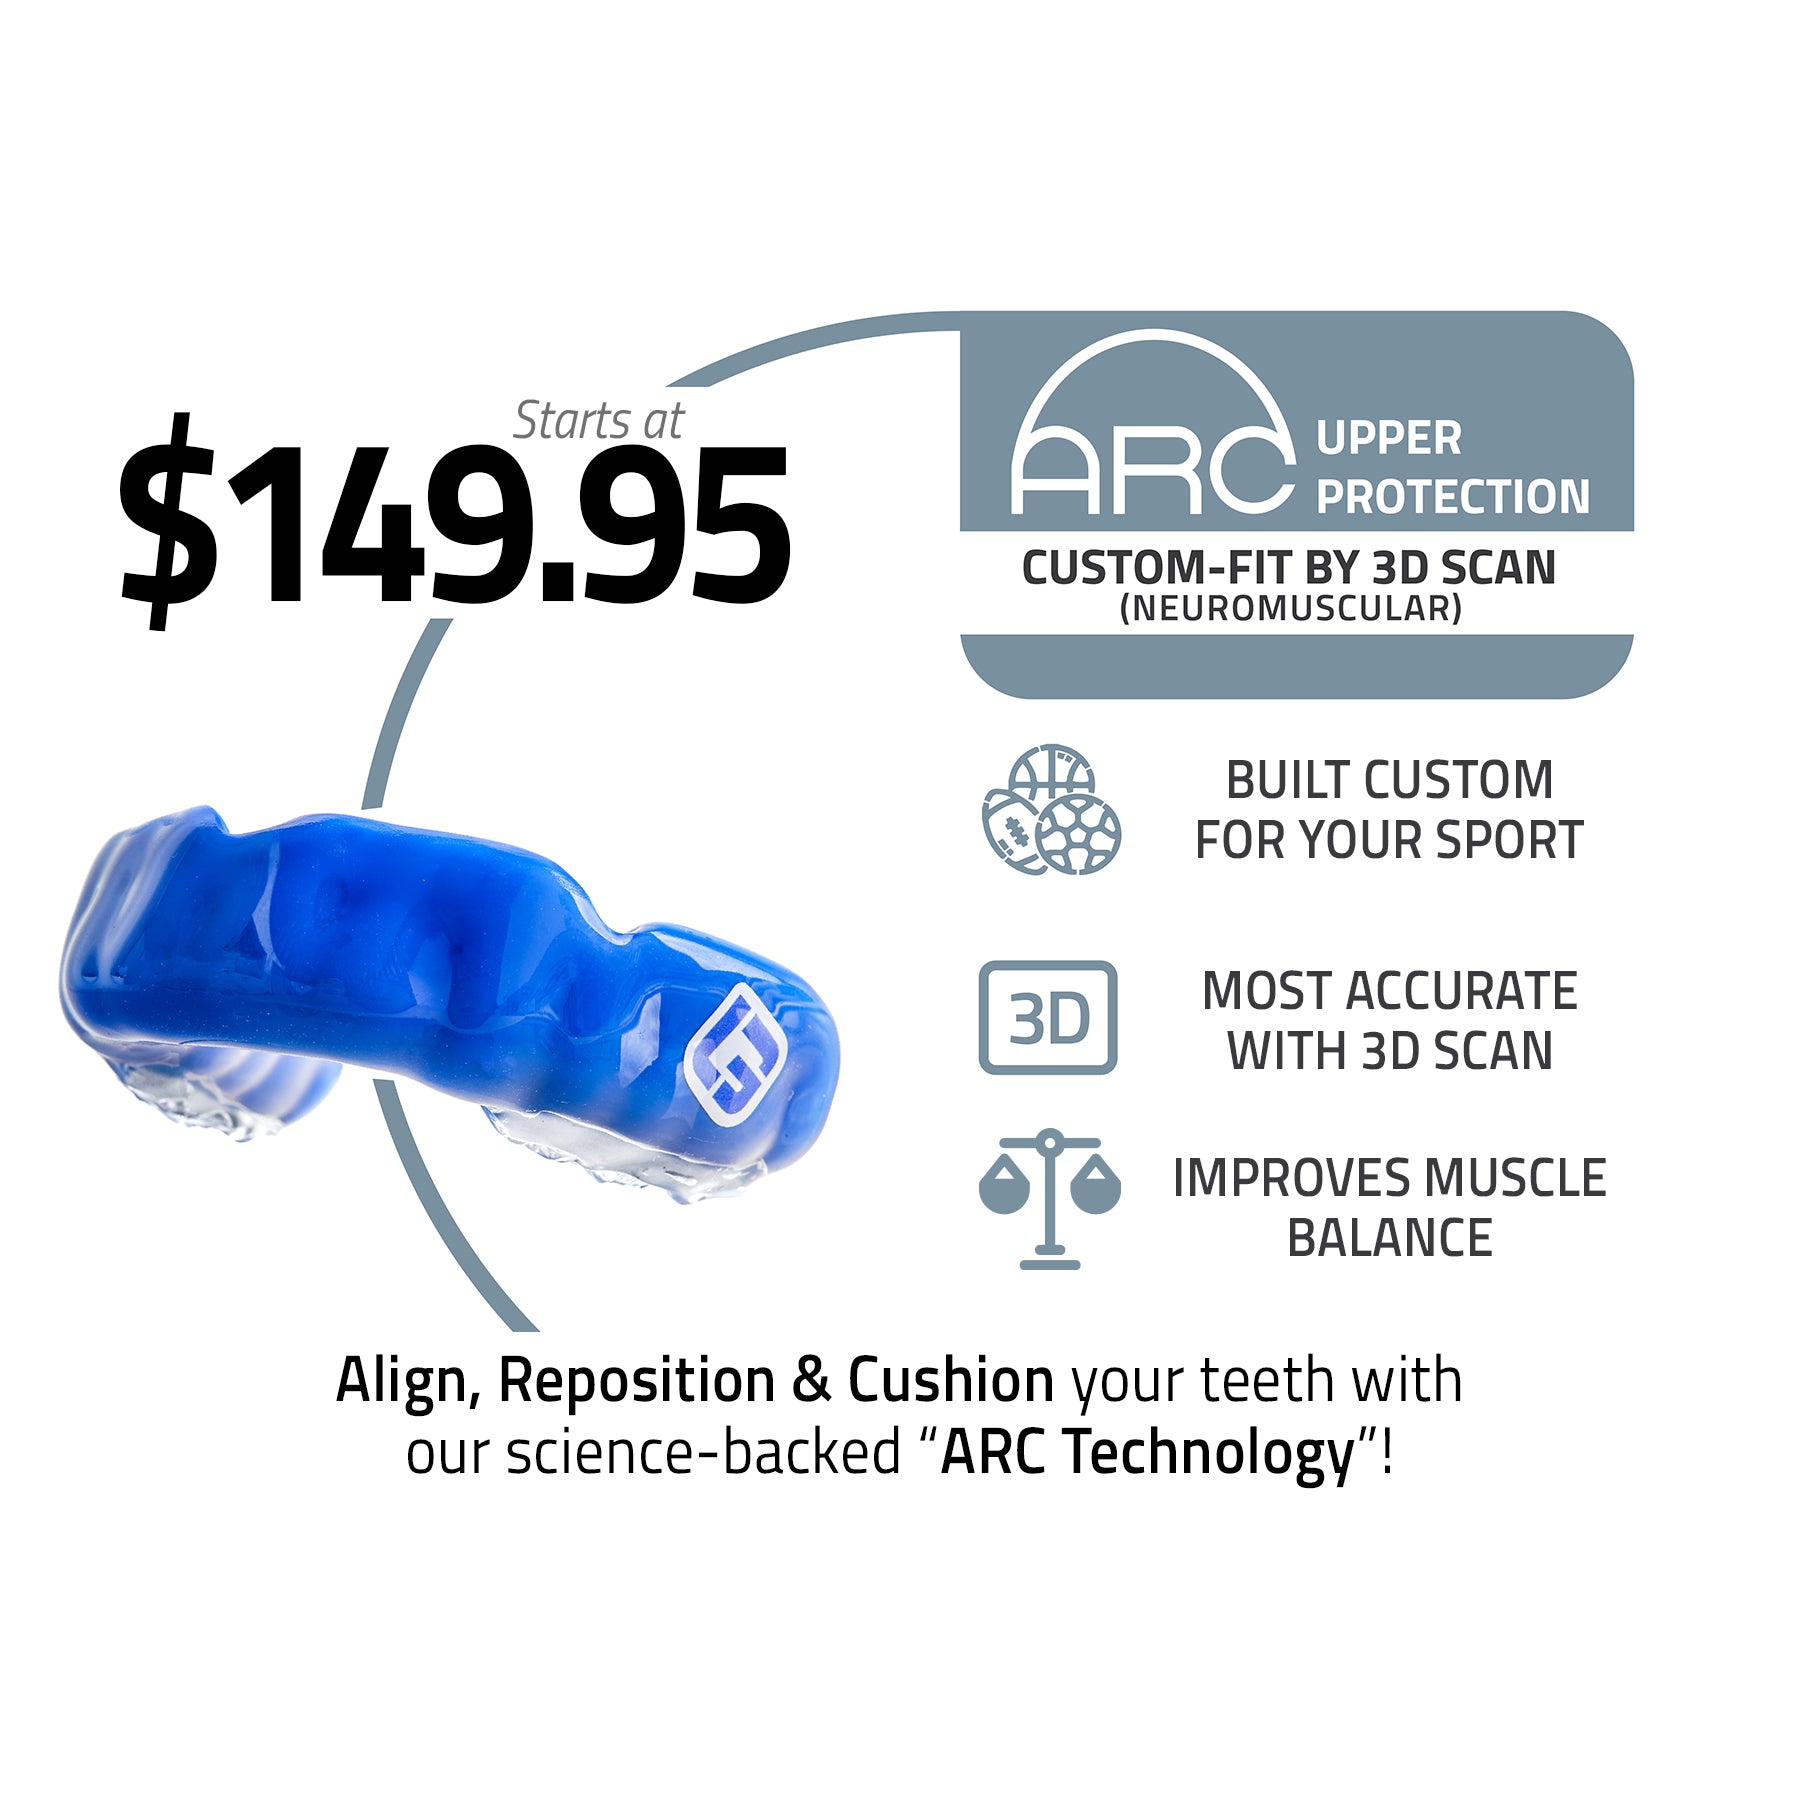 banner, ARC upper protection, custom fit by 3d scan, neuromuscular, starts at $149.95, built custom for your sport, most accurate with 3d scan, improves muscle balance, align, reposition and cushion your teeth with our science backed, ARC Technology.